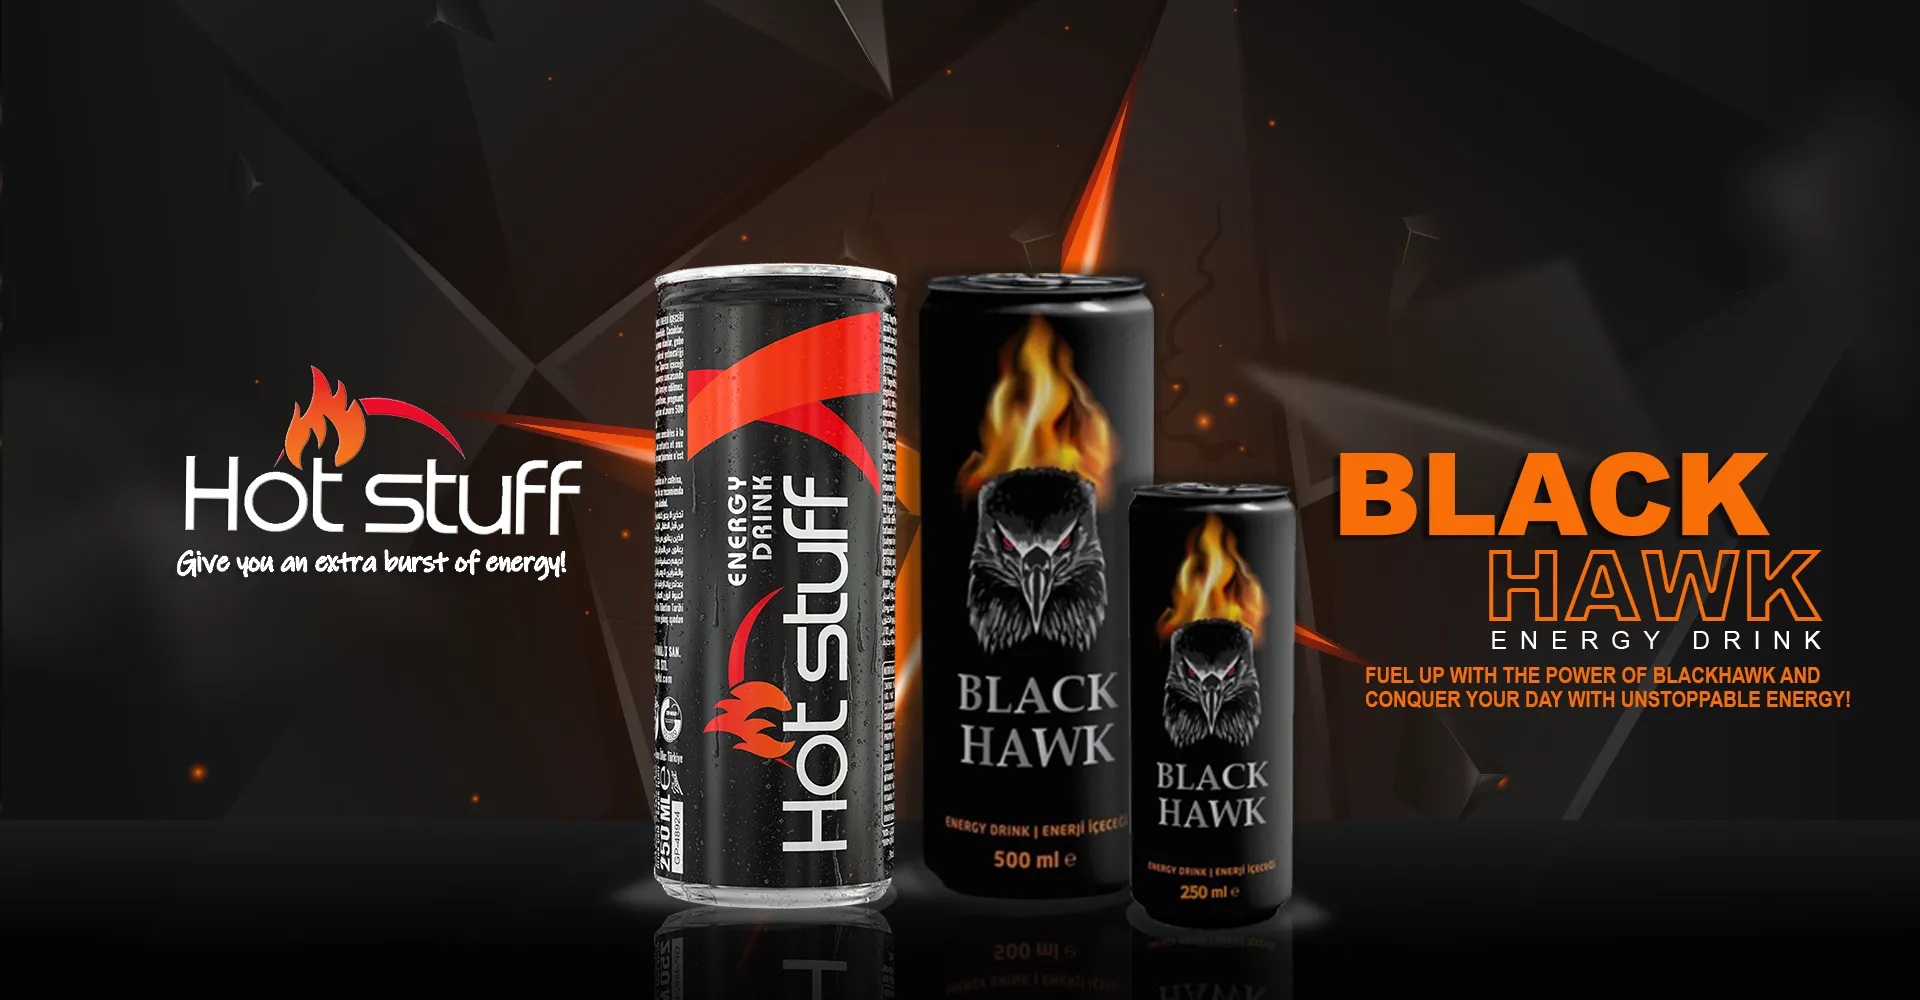 Edgy marketing banner for Hot Stuff and Black Hawk energy drinks, emphasizing their intense energy boost with fiery graphics and bold text.